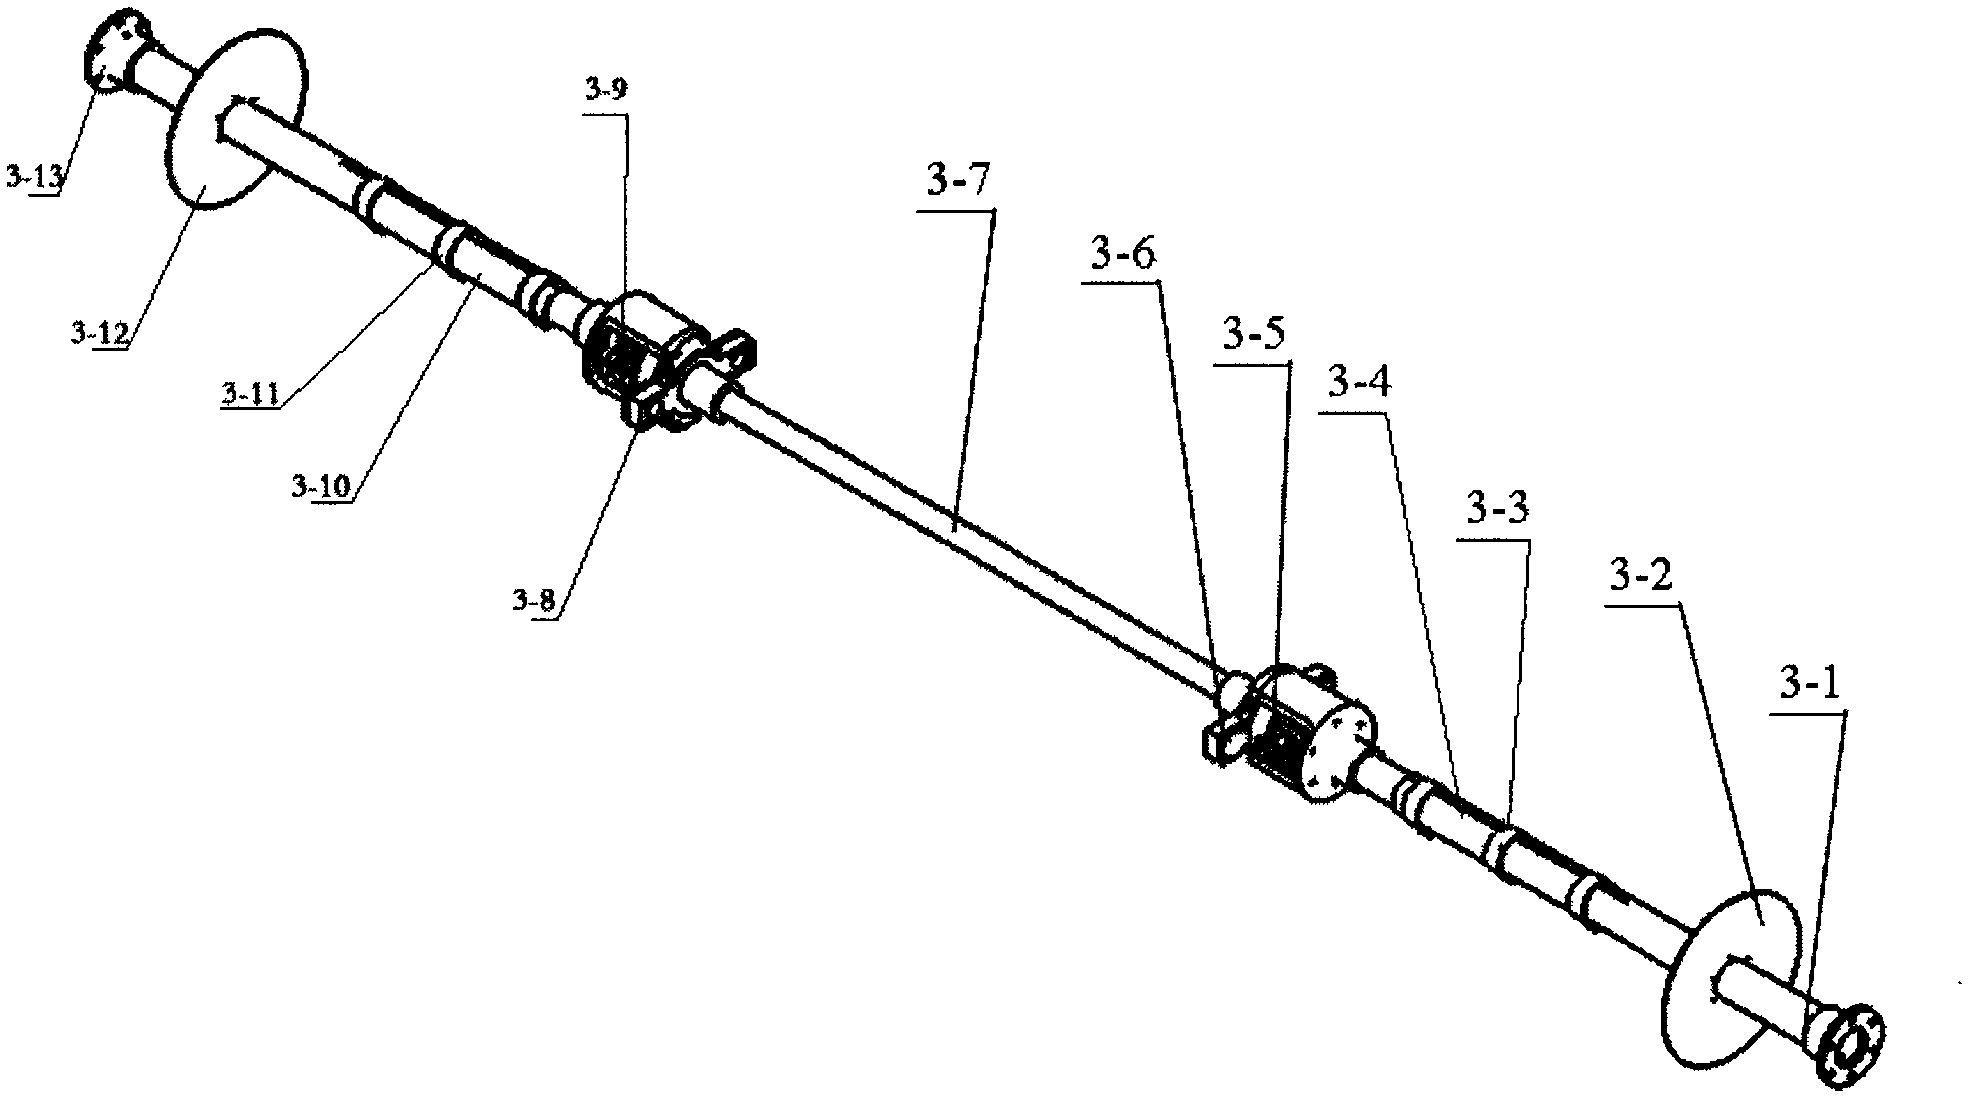 Decoupled three-degree-of-freedom forced vibration system for bridge section model